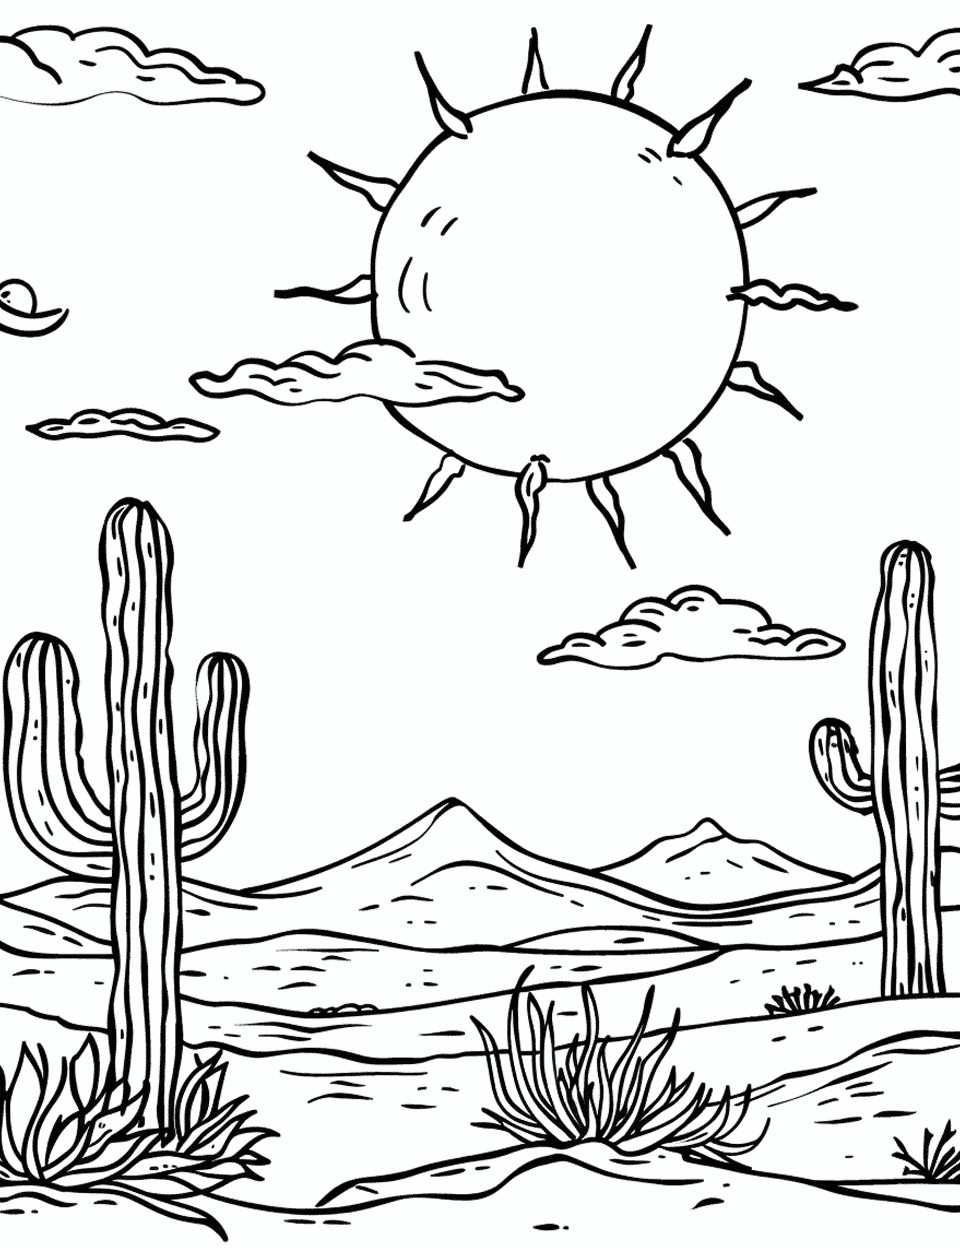 Desert Sun at Noon Coloring Page - A bright sun blazing down on a desert landscape with a few cacti.